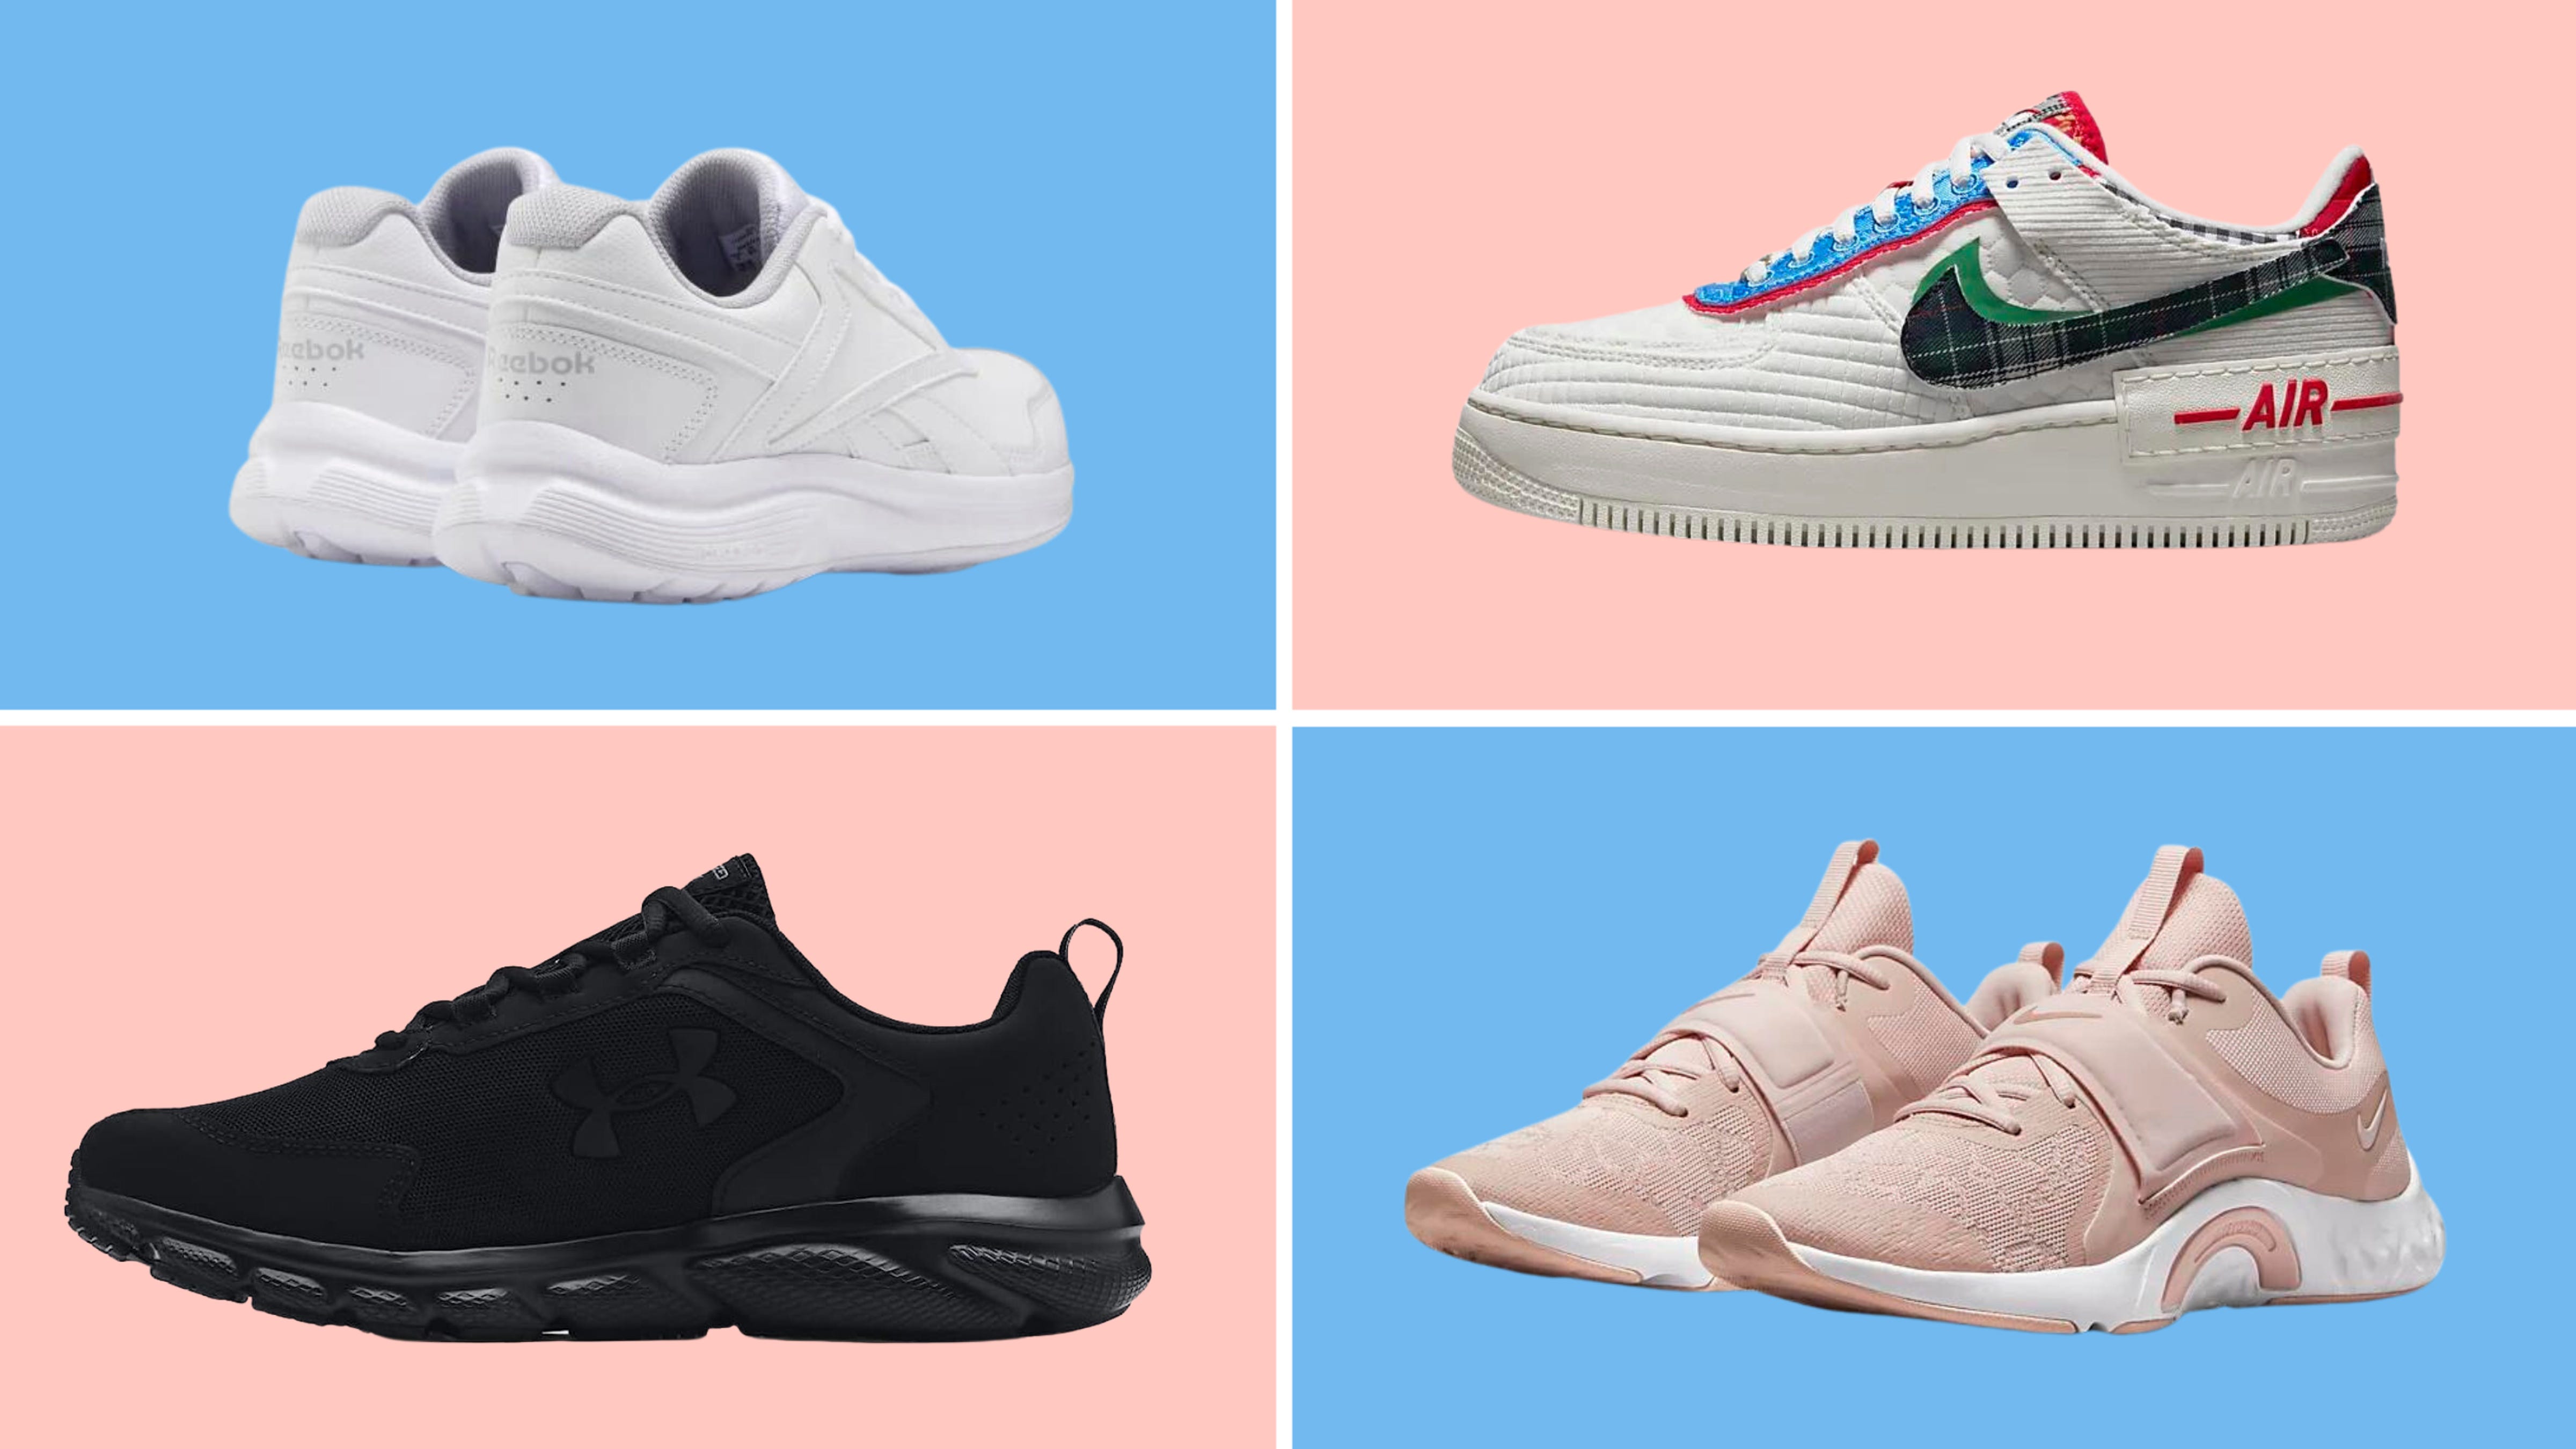 Nike sneakers: Save on Nike Air and kicks from other top